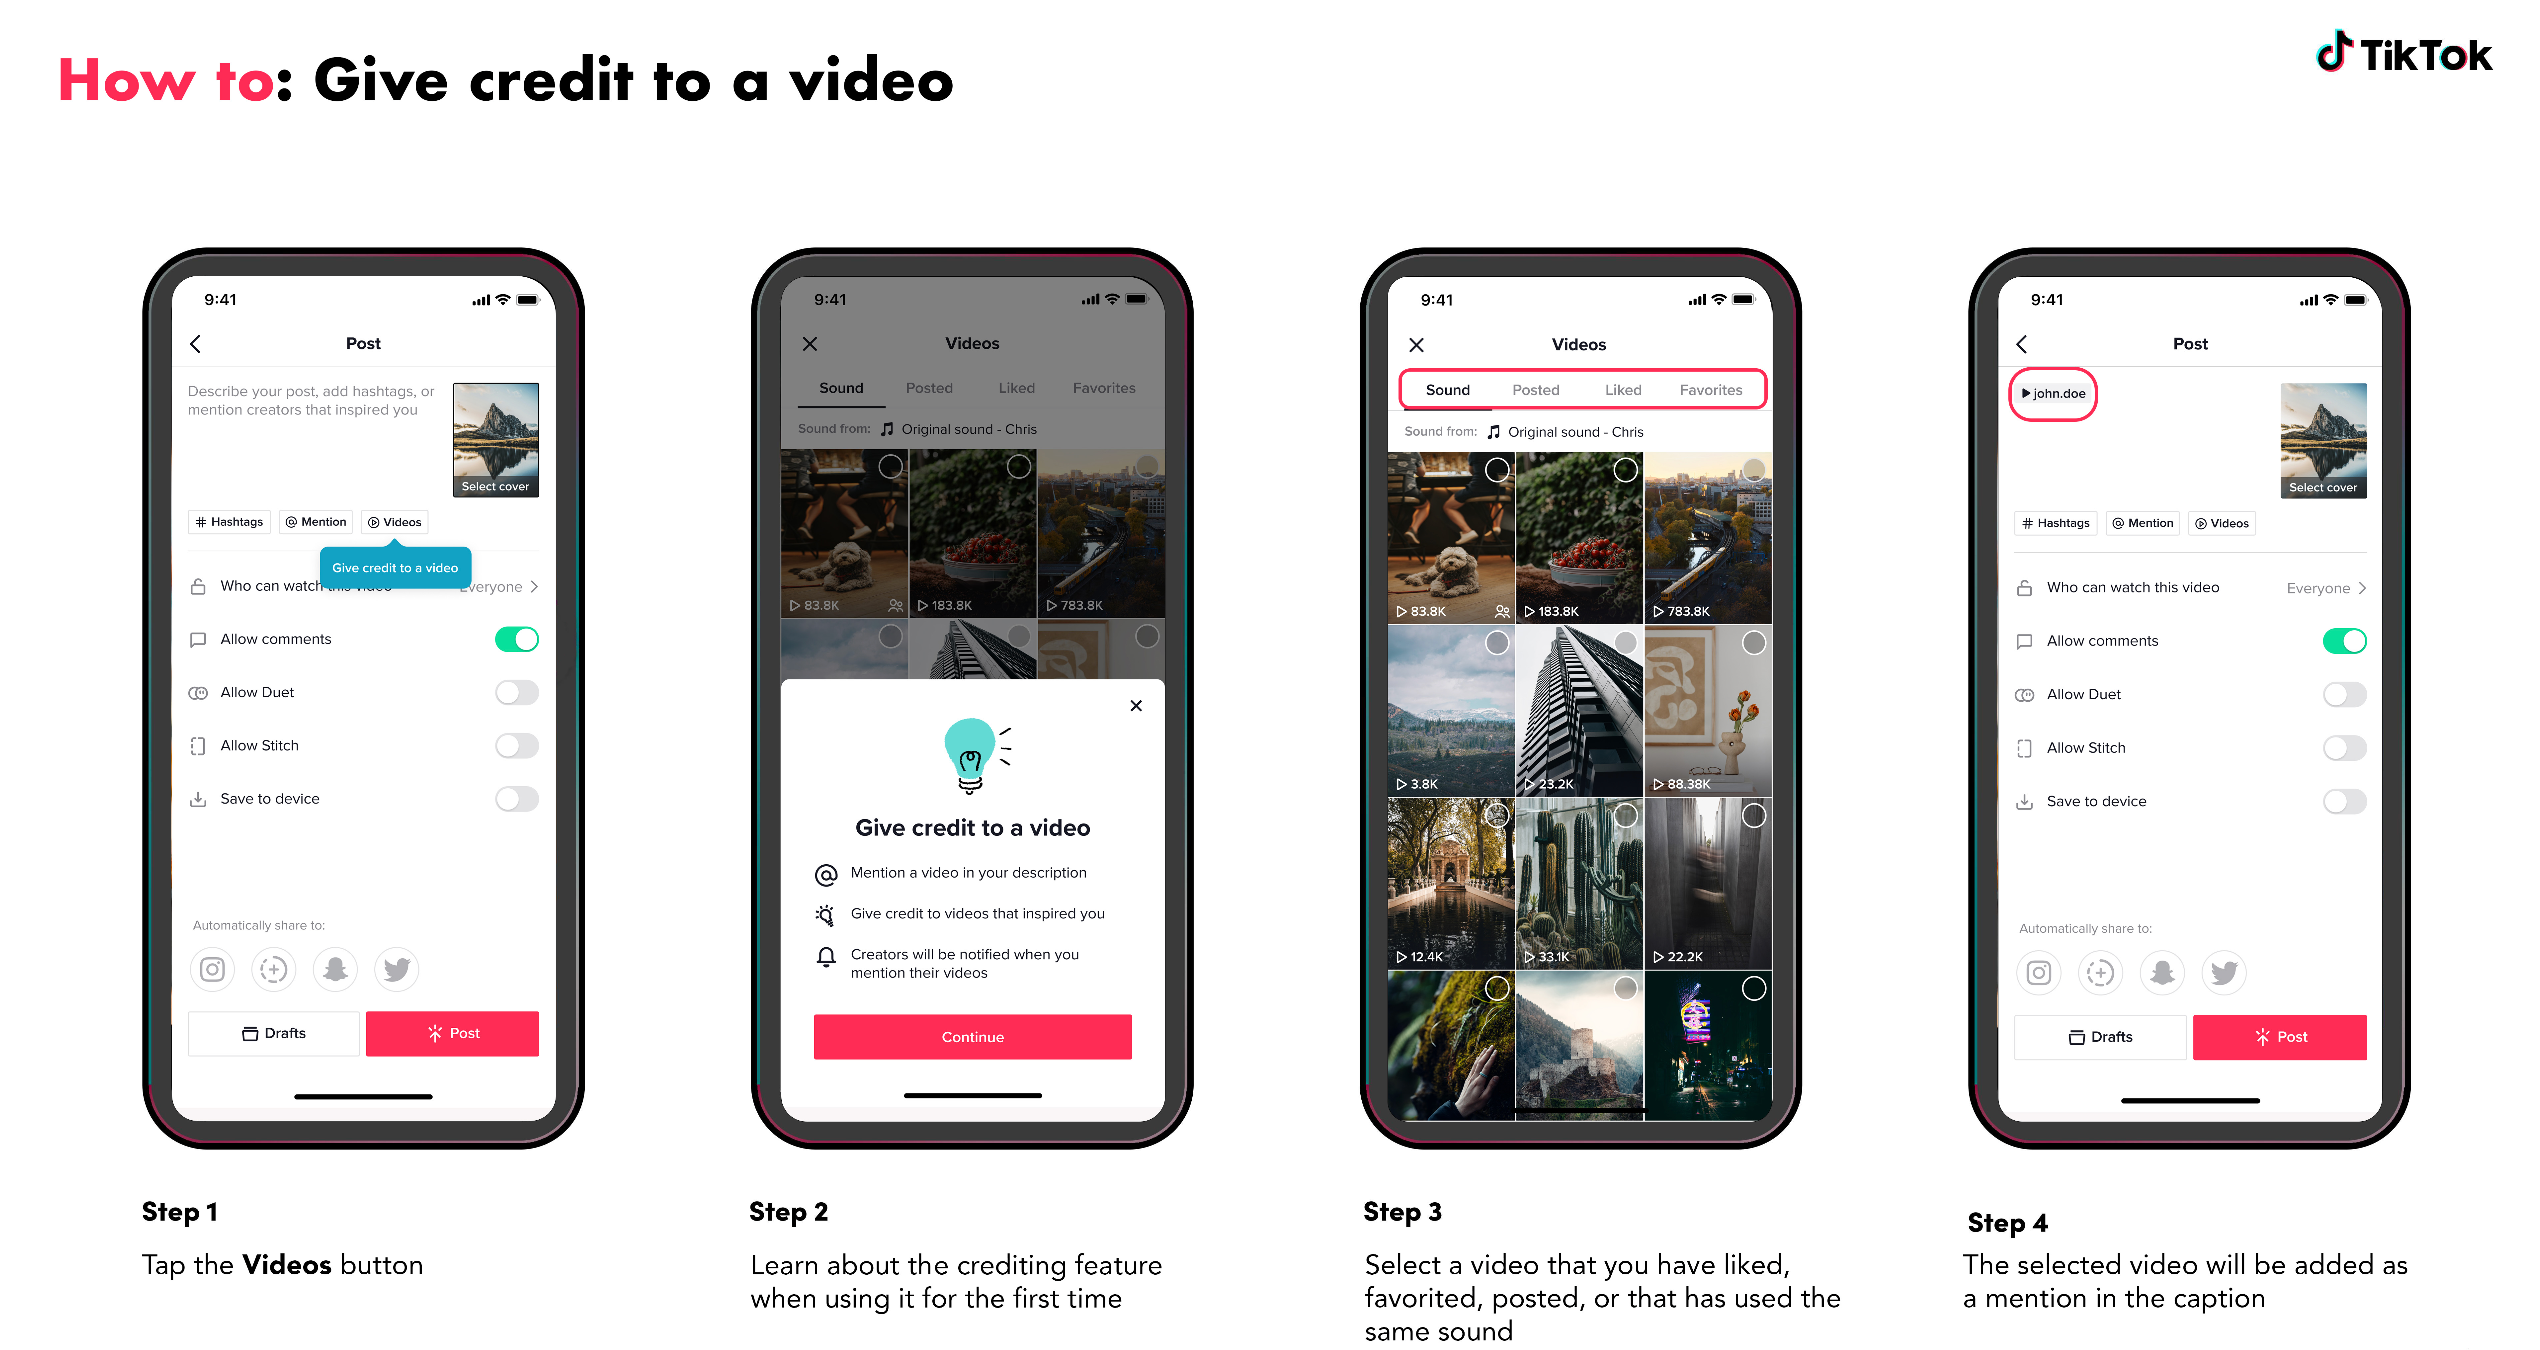 TikTok introduces users to ways to recognize ideas from other authors